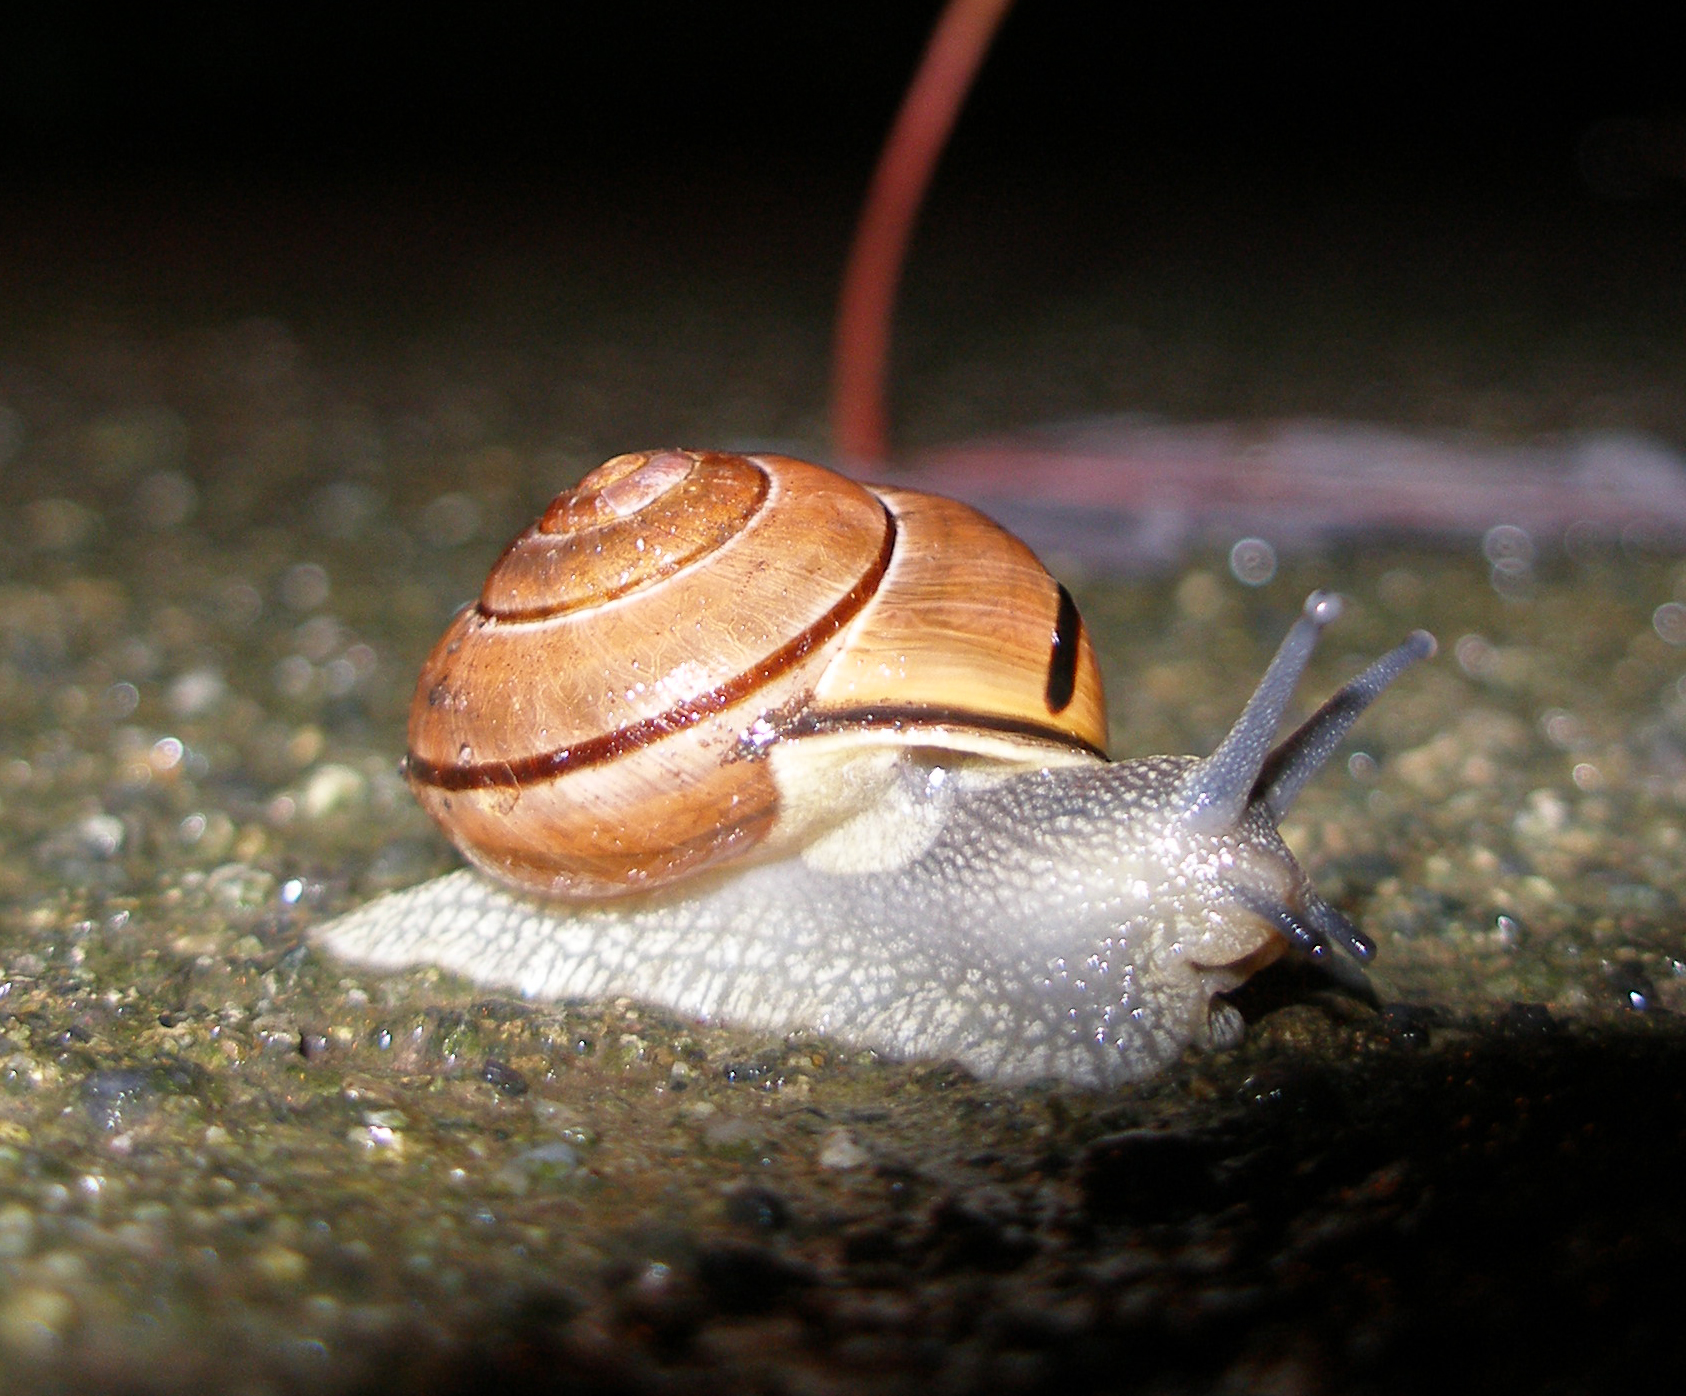 a close up of a snail laying on the ground